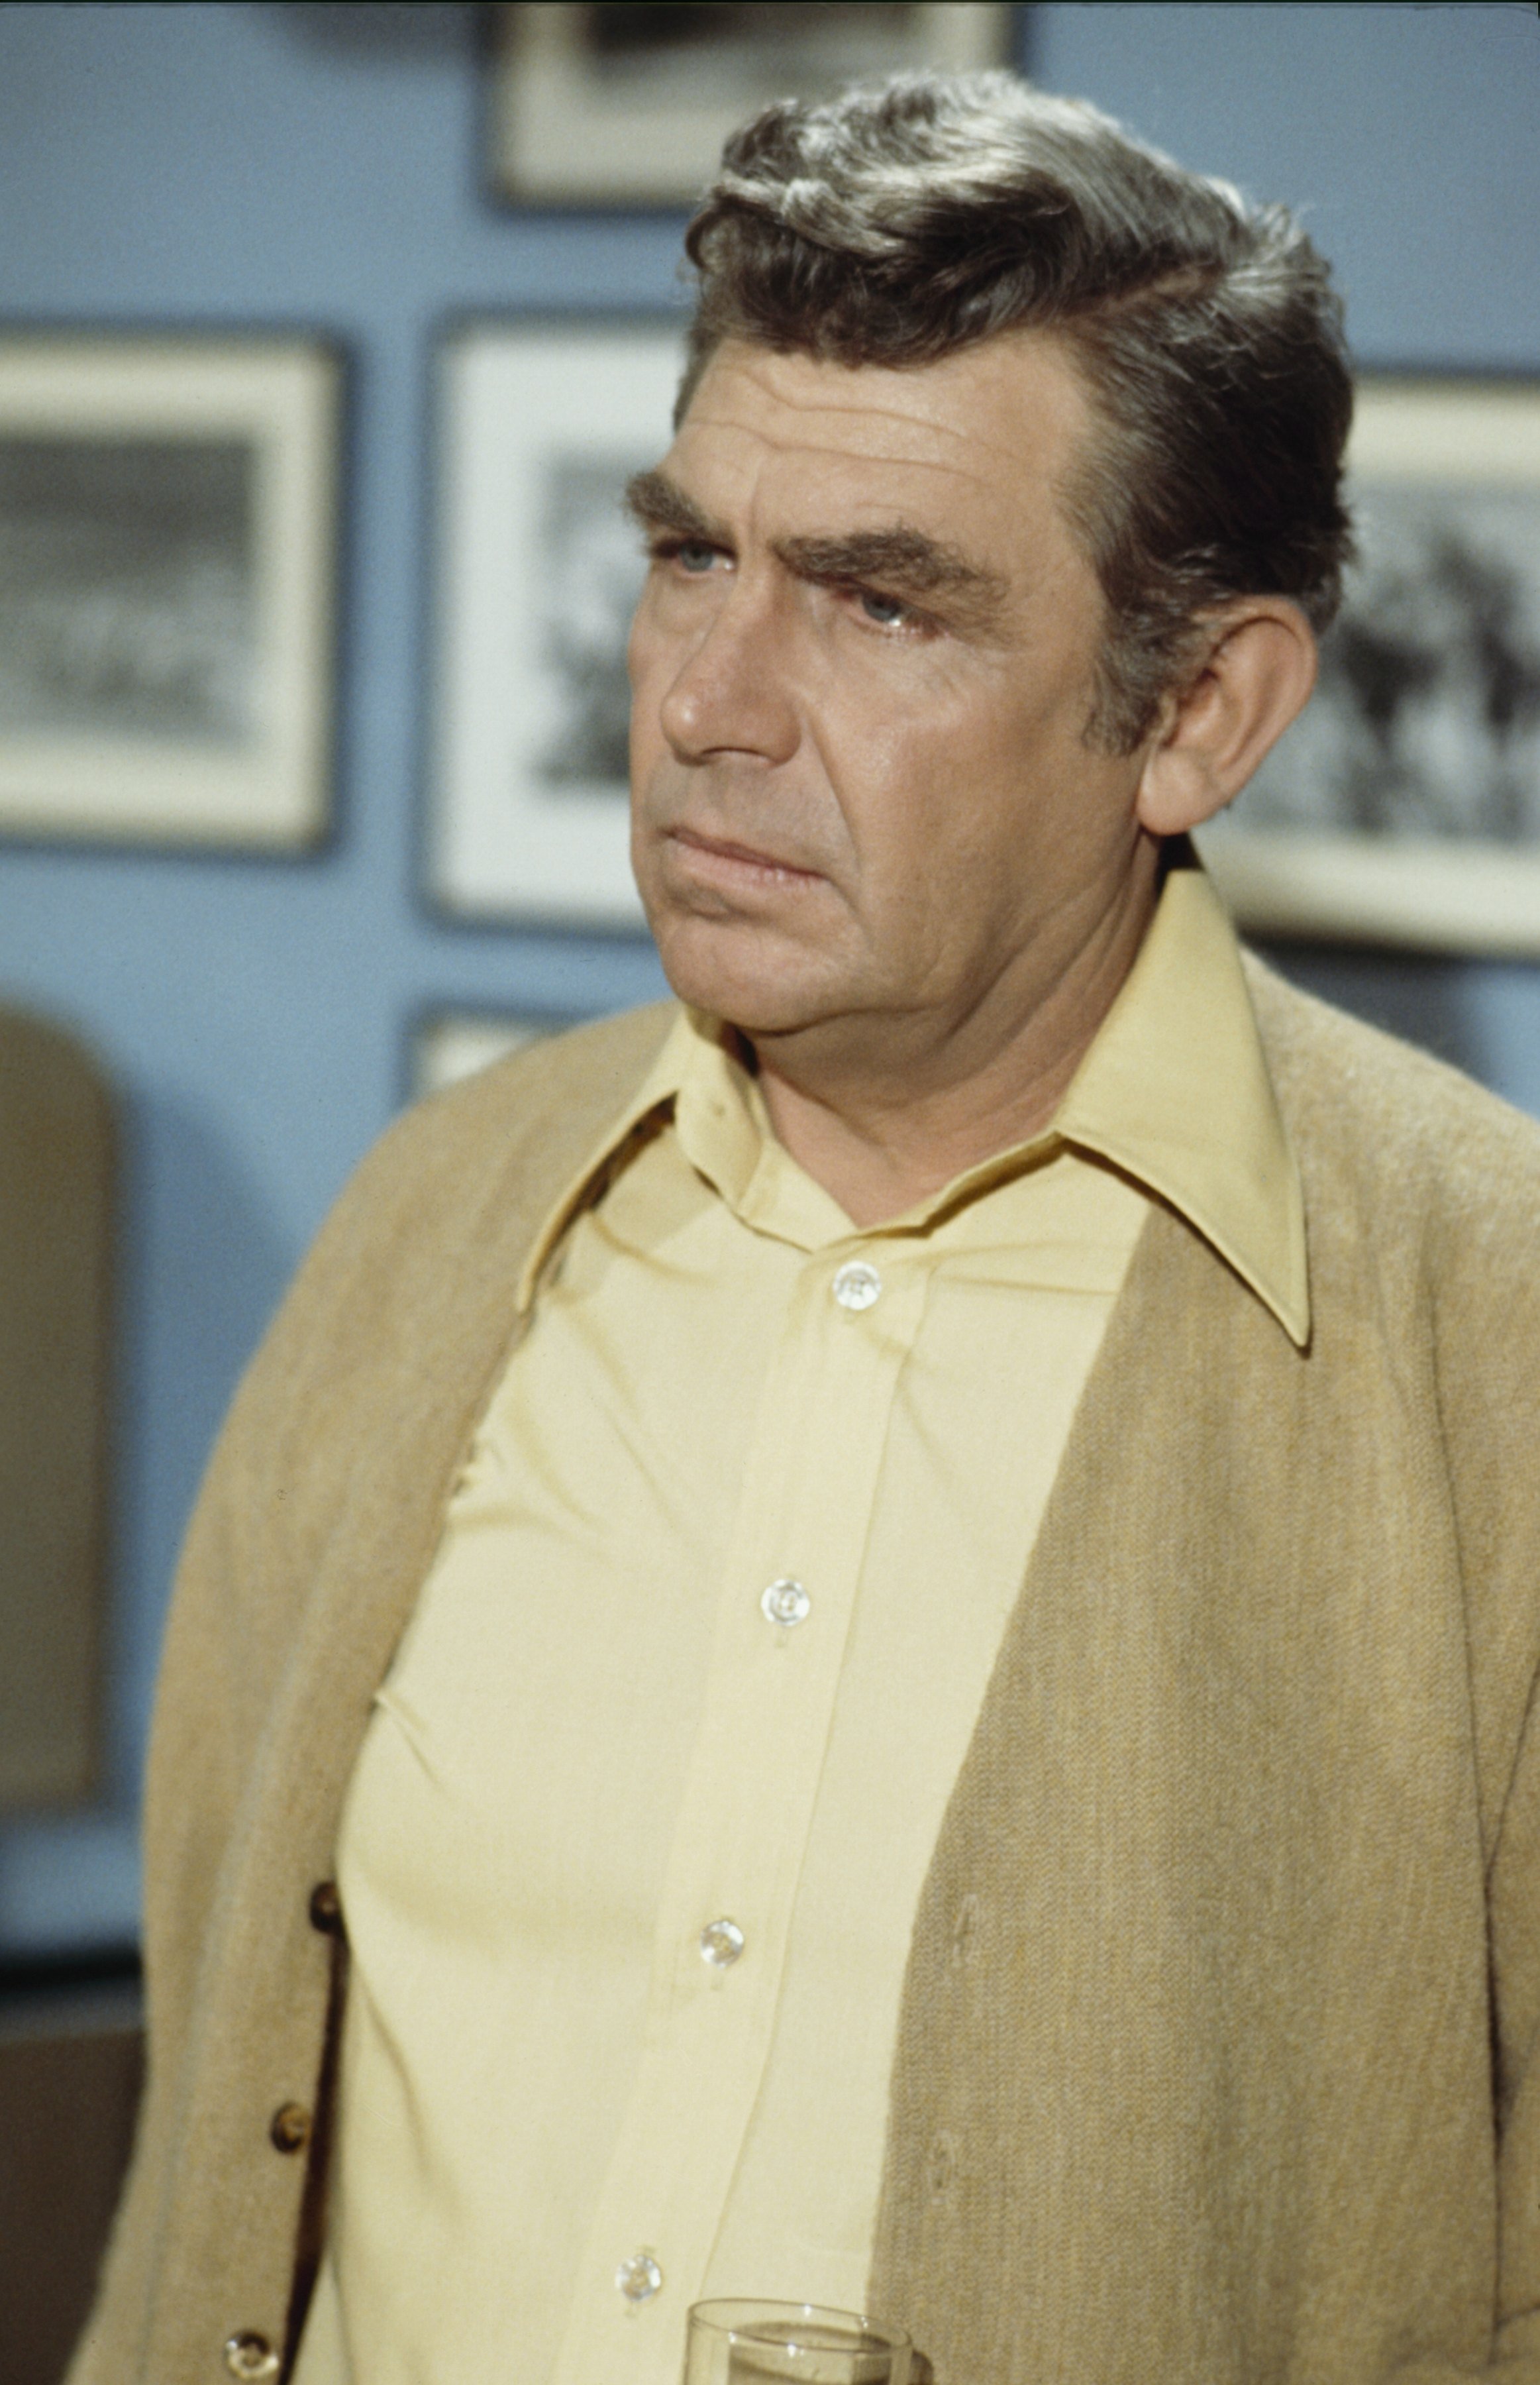 Andy Griffith on the set of "Mod Squad," which aired on April 7, 1972 | Source: Getty Images